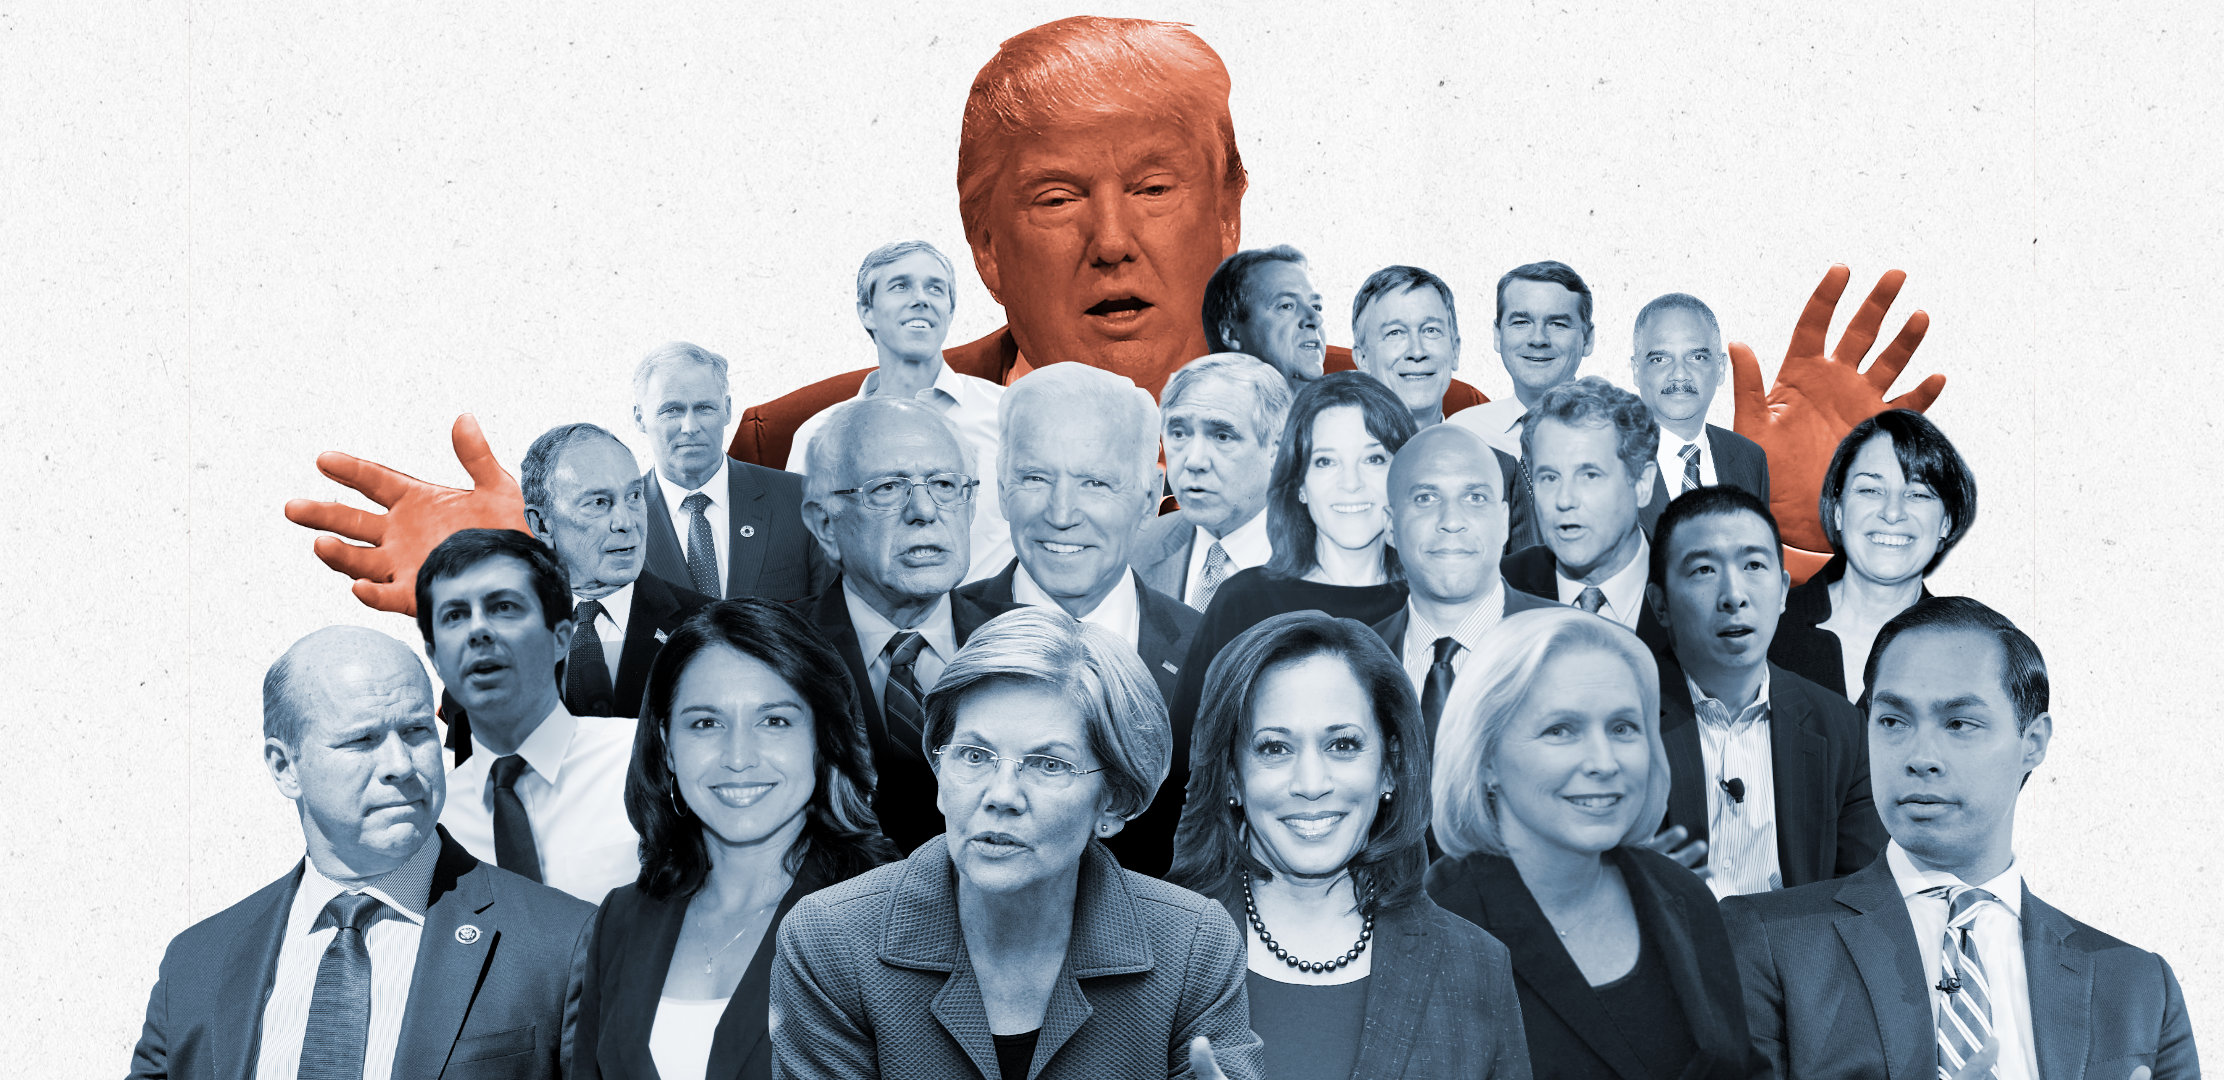 An illustration showing the faces of the Democratic presidential candidates in the 2020 election beneath President Donald Trump.